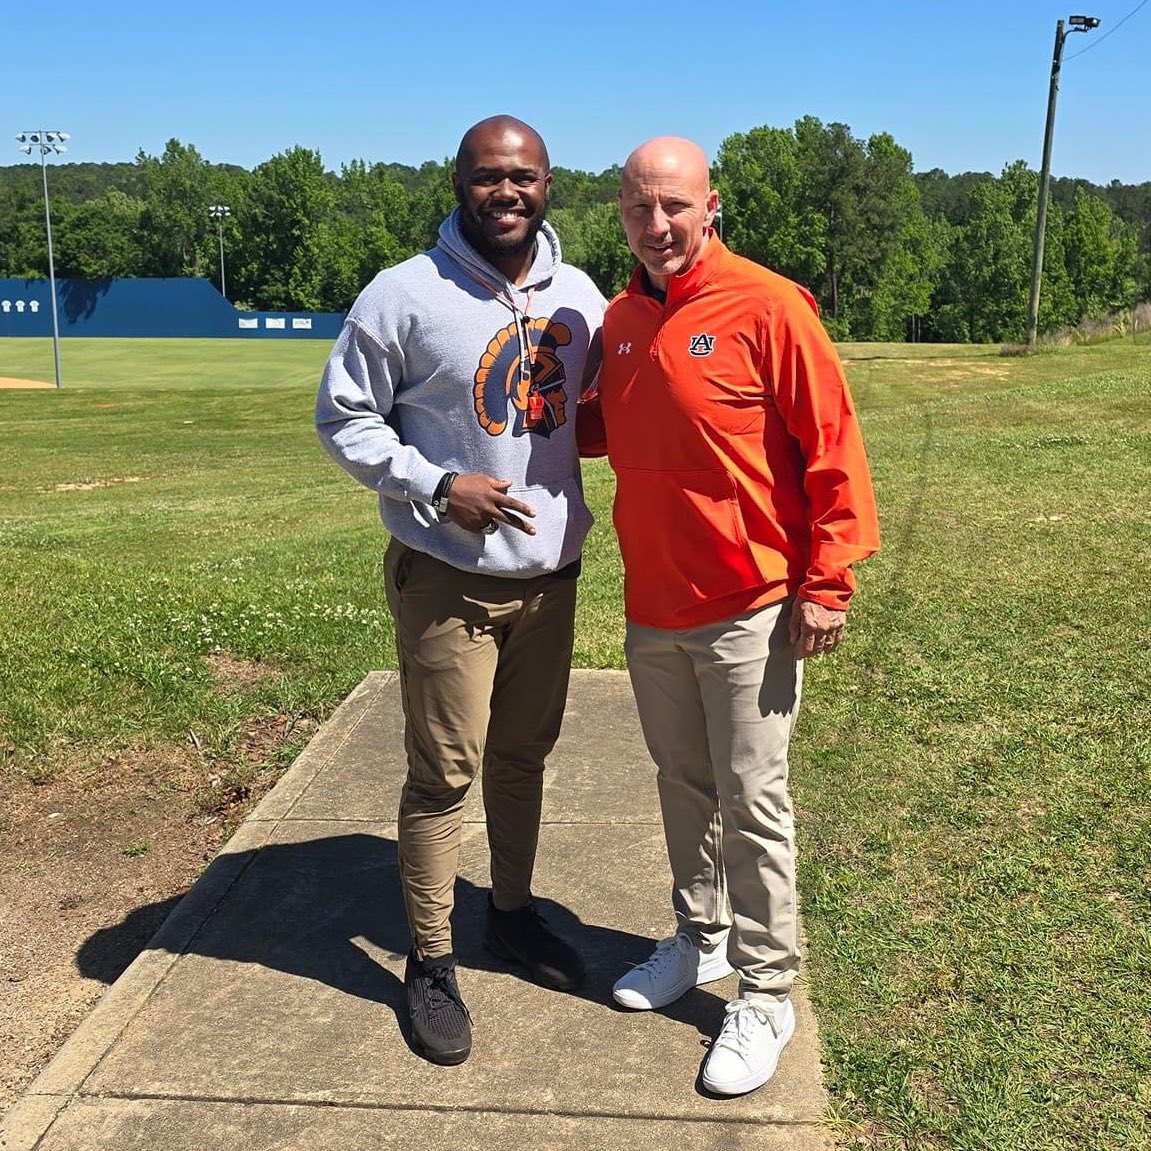 Charles Henderson Athletics would like to thank Coach Charles Kelly, Co-DC at Auburn University, for stopping by Chuck High today to recruit some great STUDENT-Athletes! We appreciate you! #RecruitCHHS #WeAreTrojans #CharlesHendersonTrojans @auburntigers @auburnrecruits